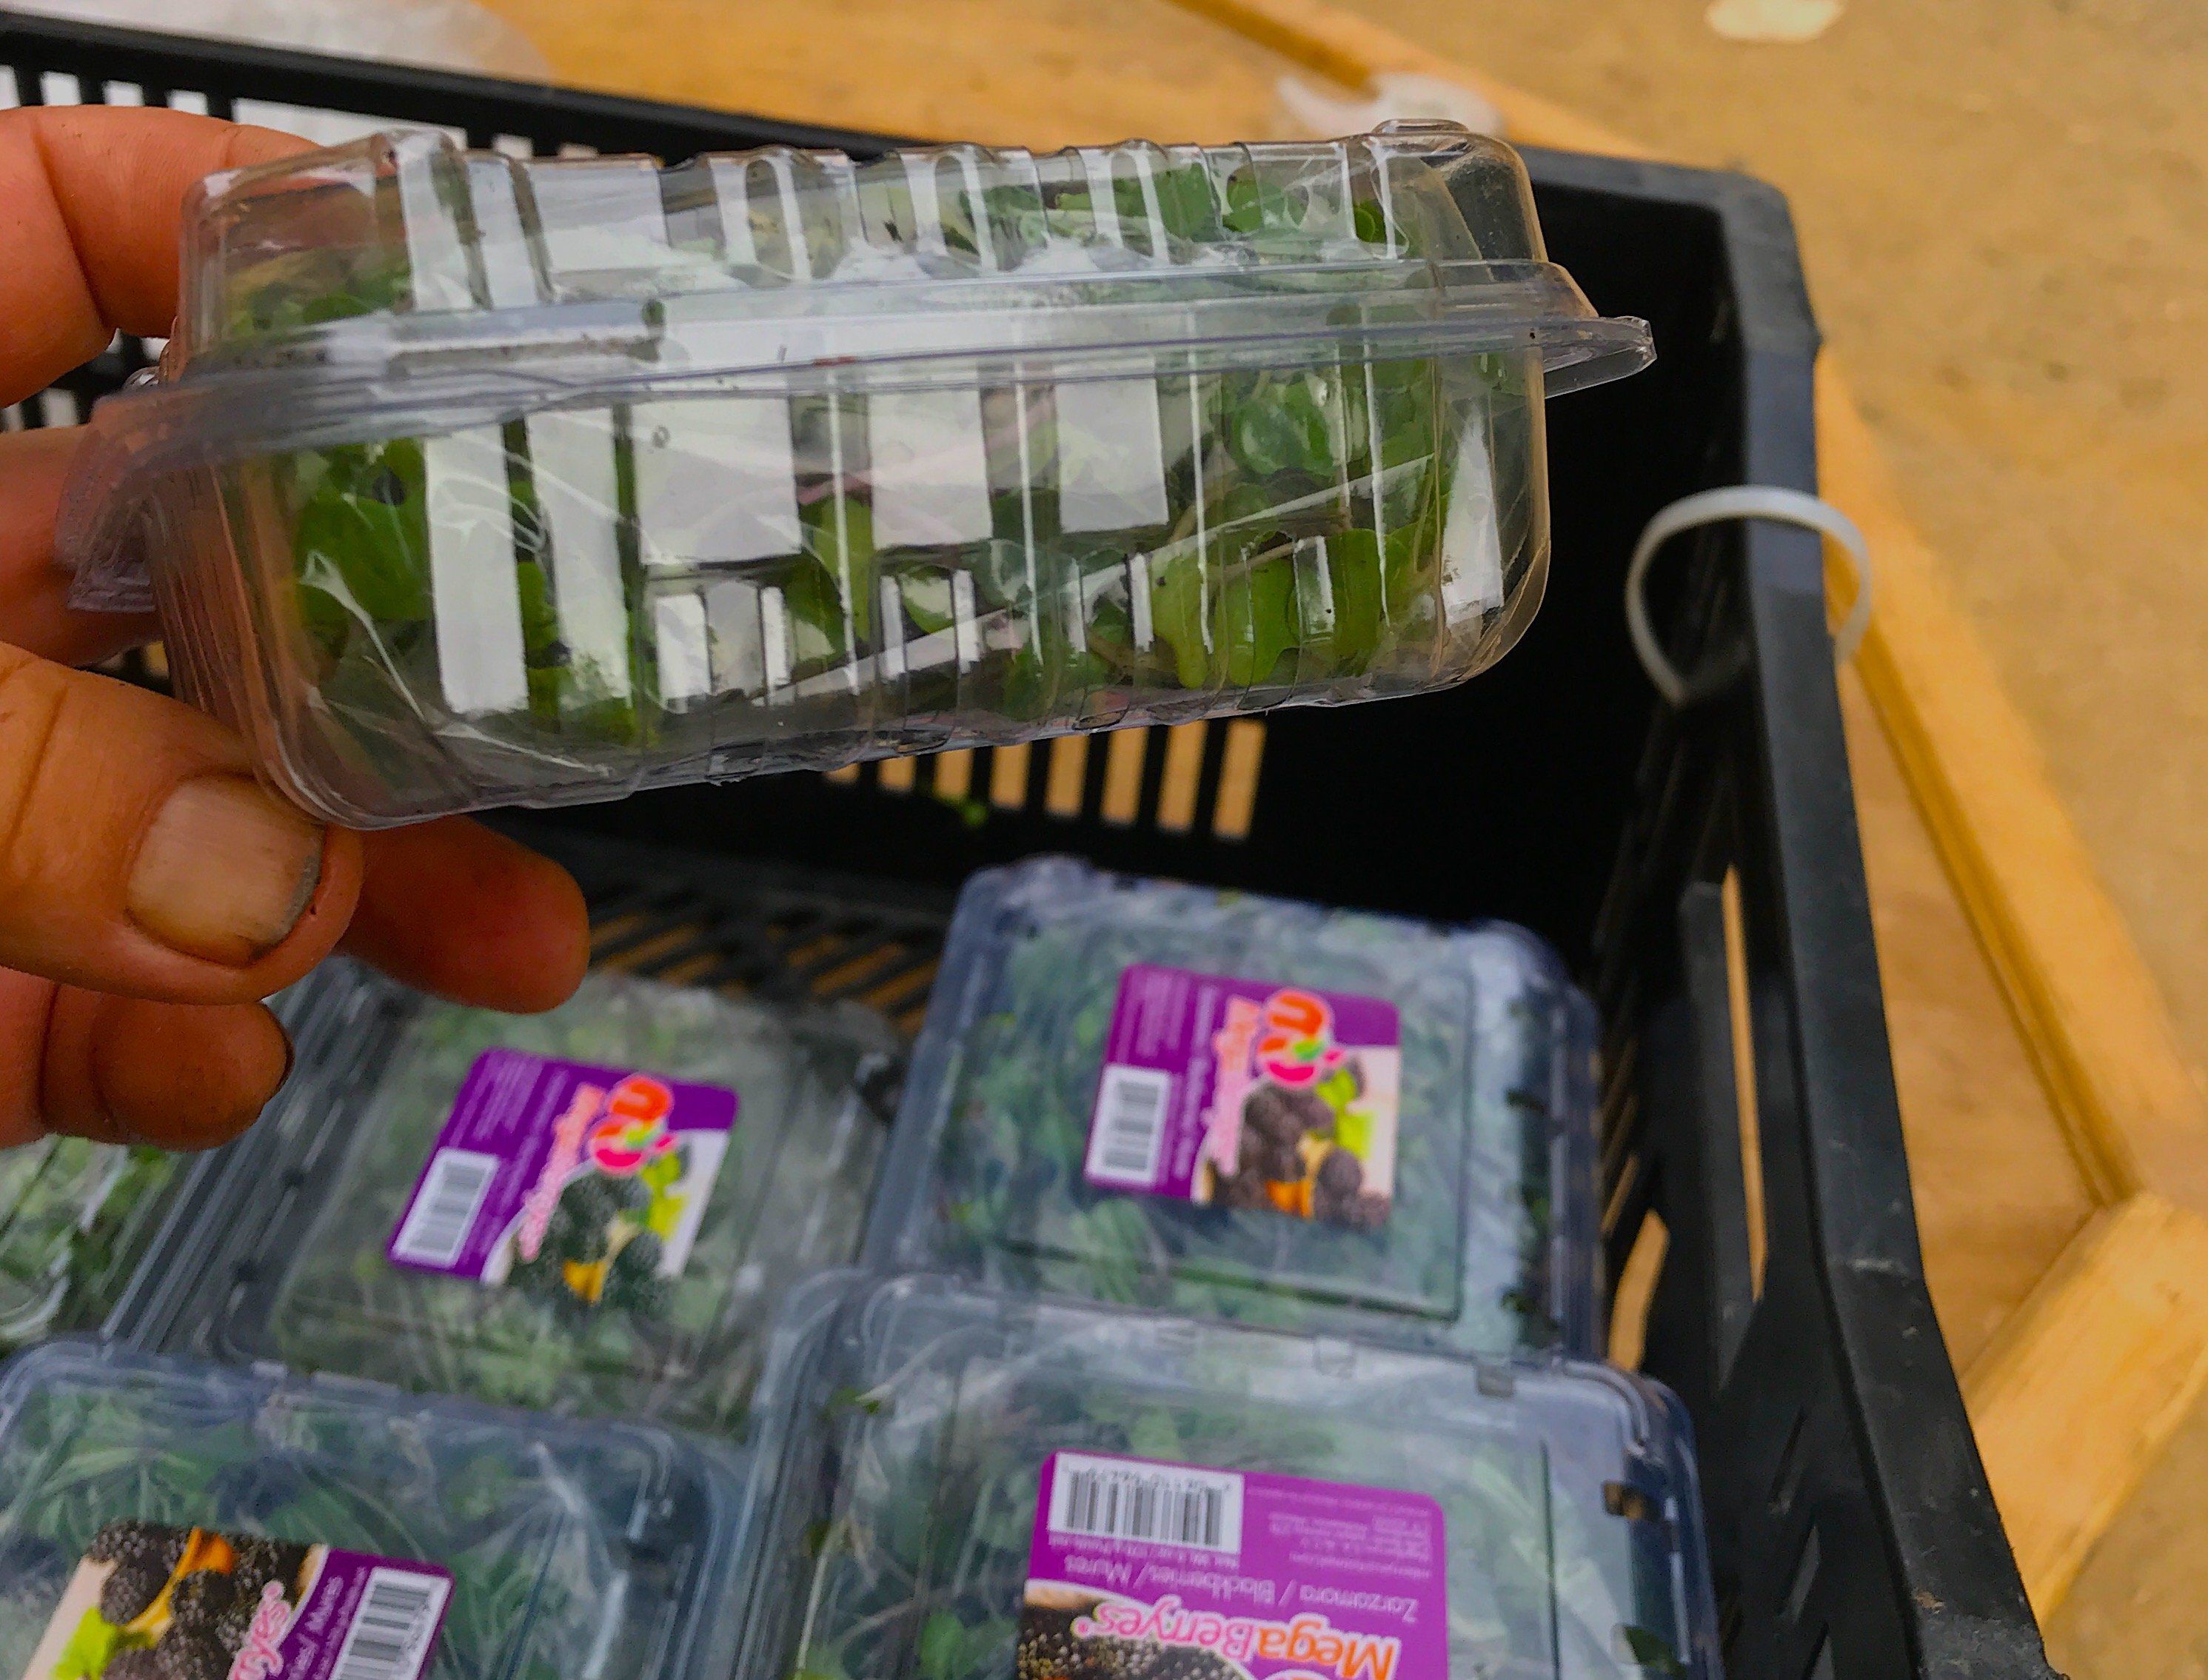 Next Happening: Week 10: Farewell to Leafy Greens, Hello Micro-Greens